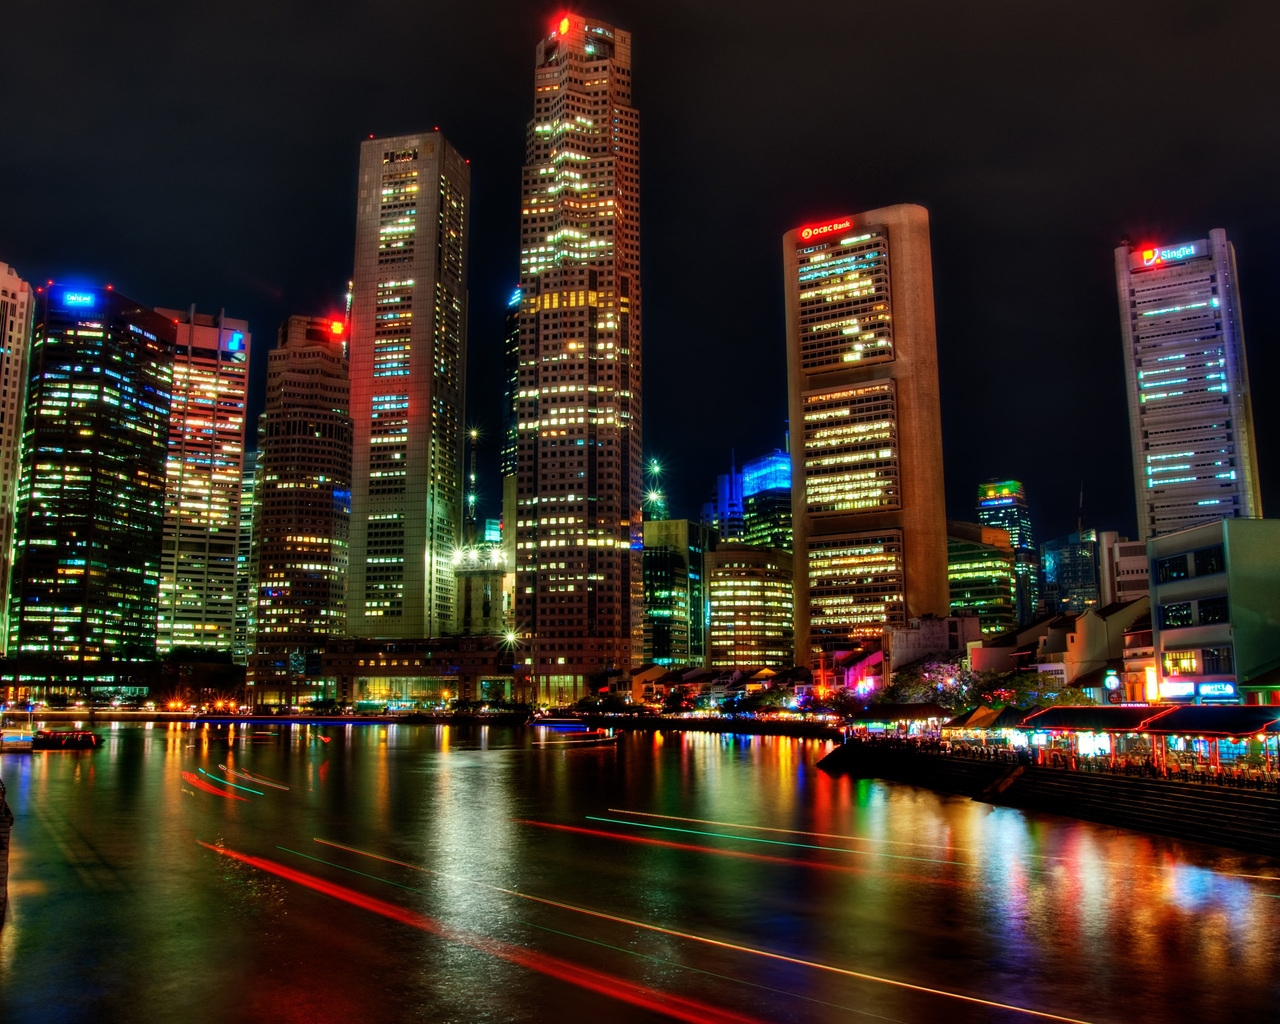 Singapore Night View for 1280 x 1024 resolution